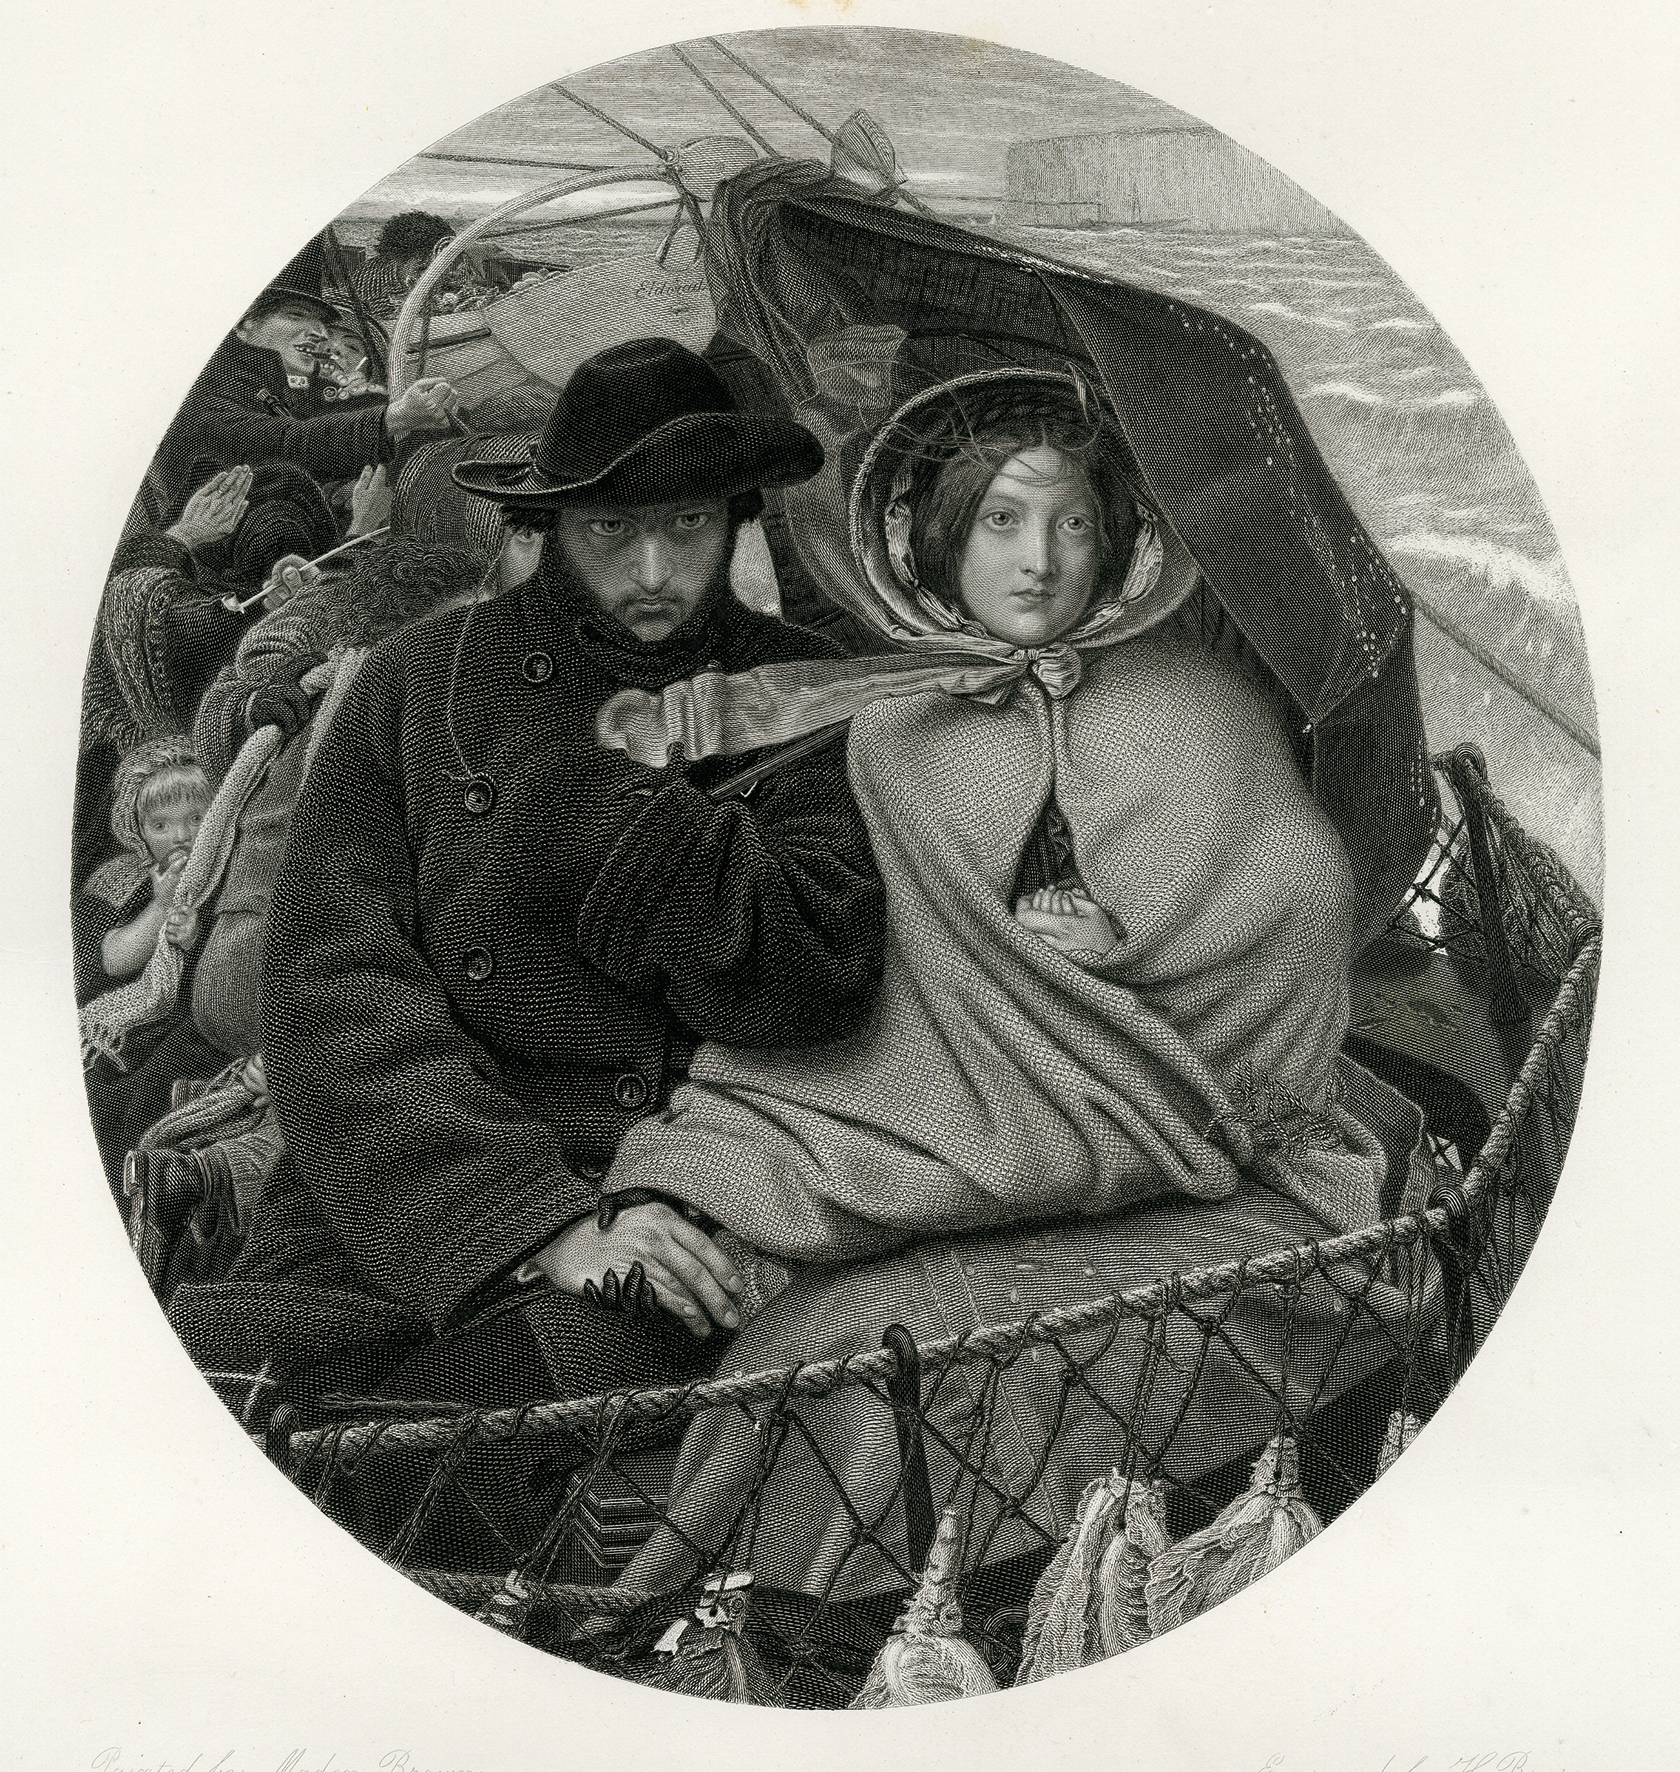 Herbert Bourne; after Ford Madox Brown, <em>The last of England</em>, c. 1867, engraving on paper. Purchased with funds from the Hilton White Bequest, 2016